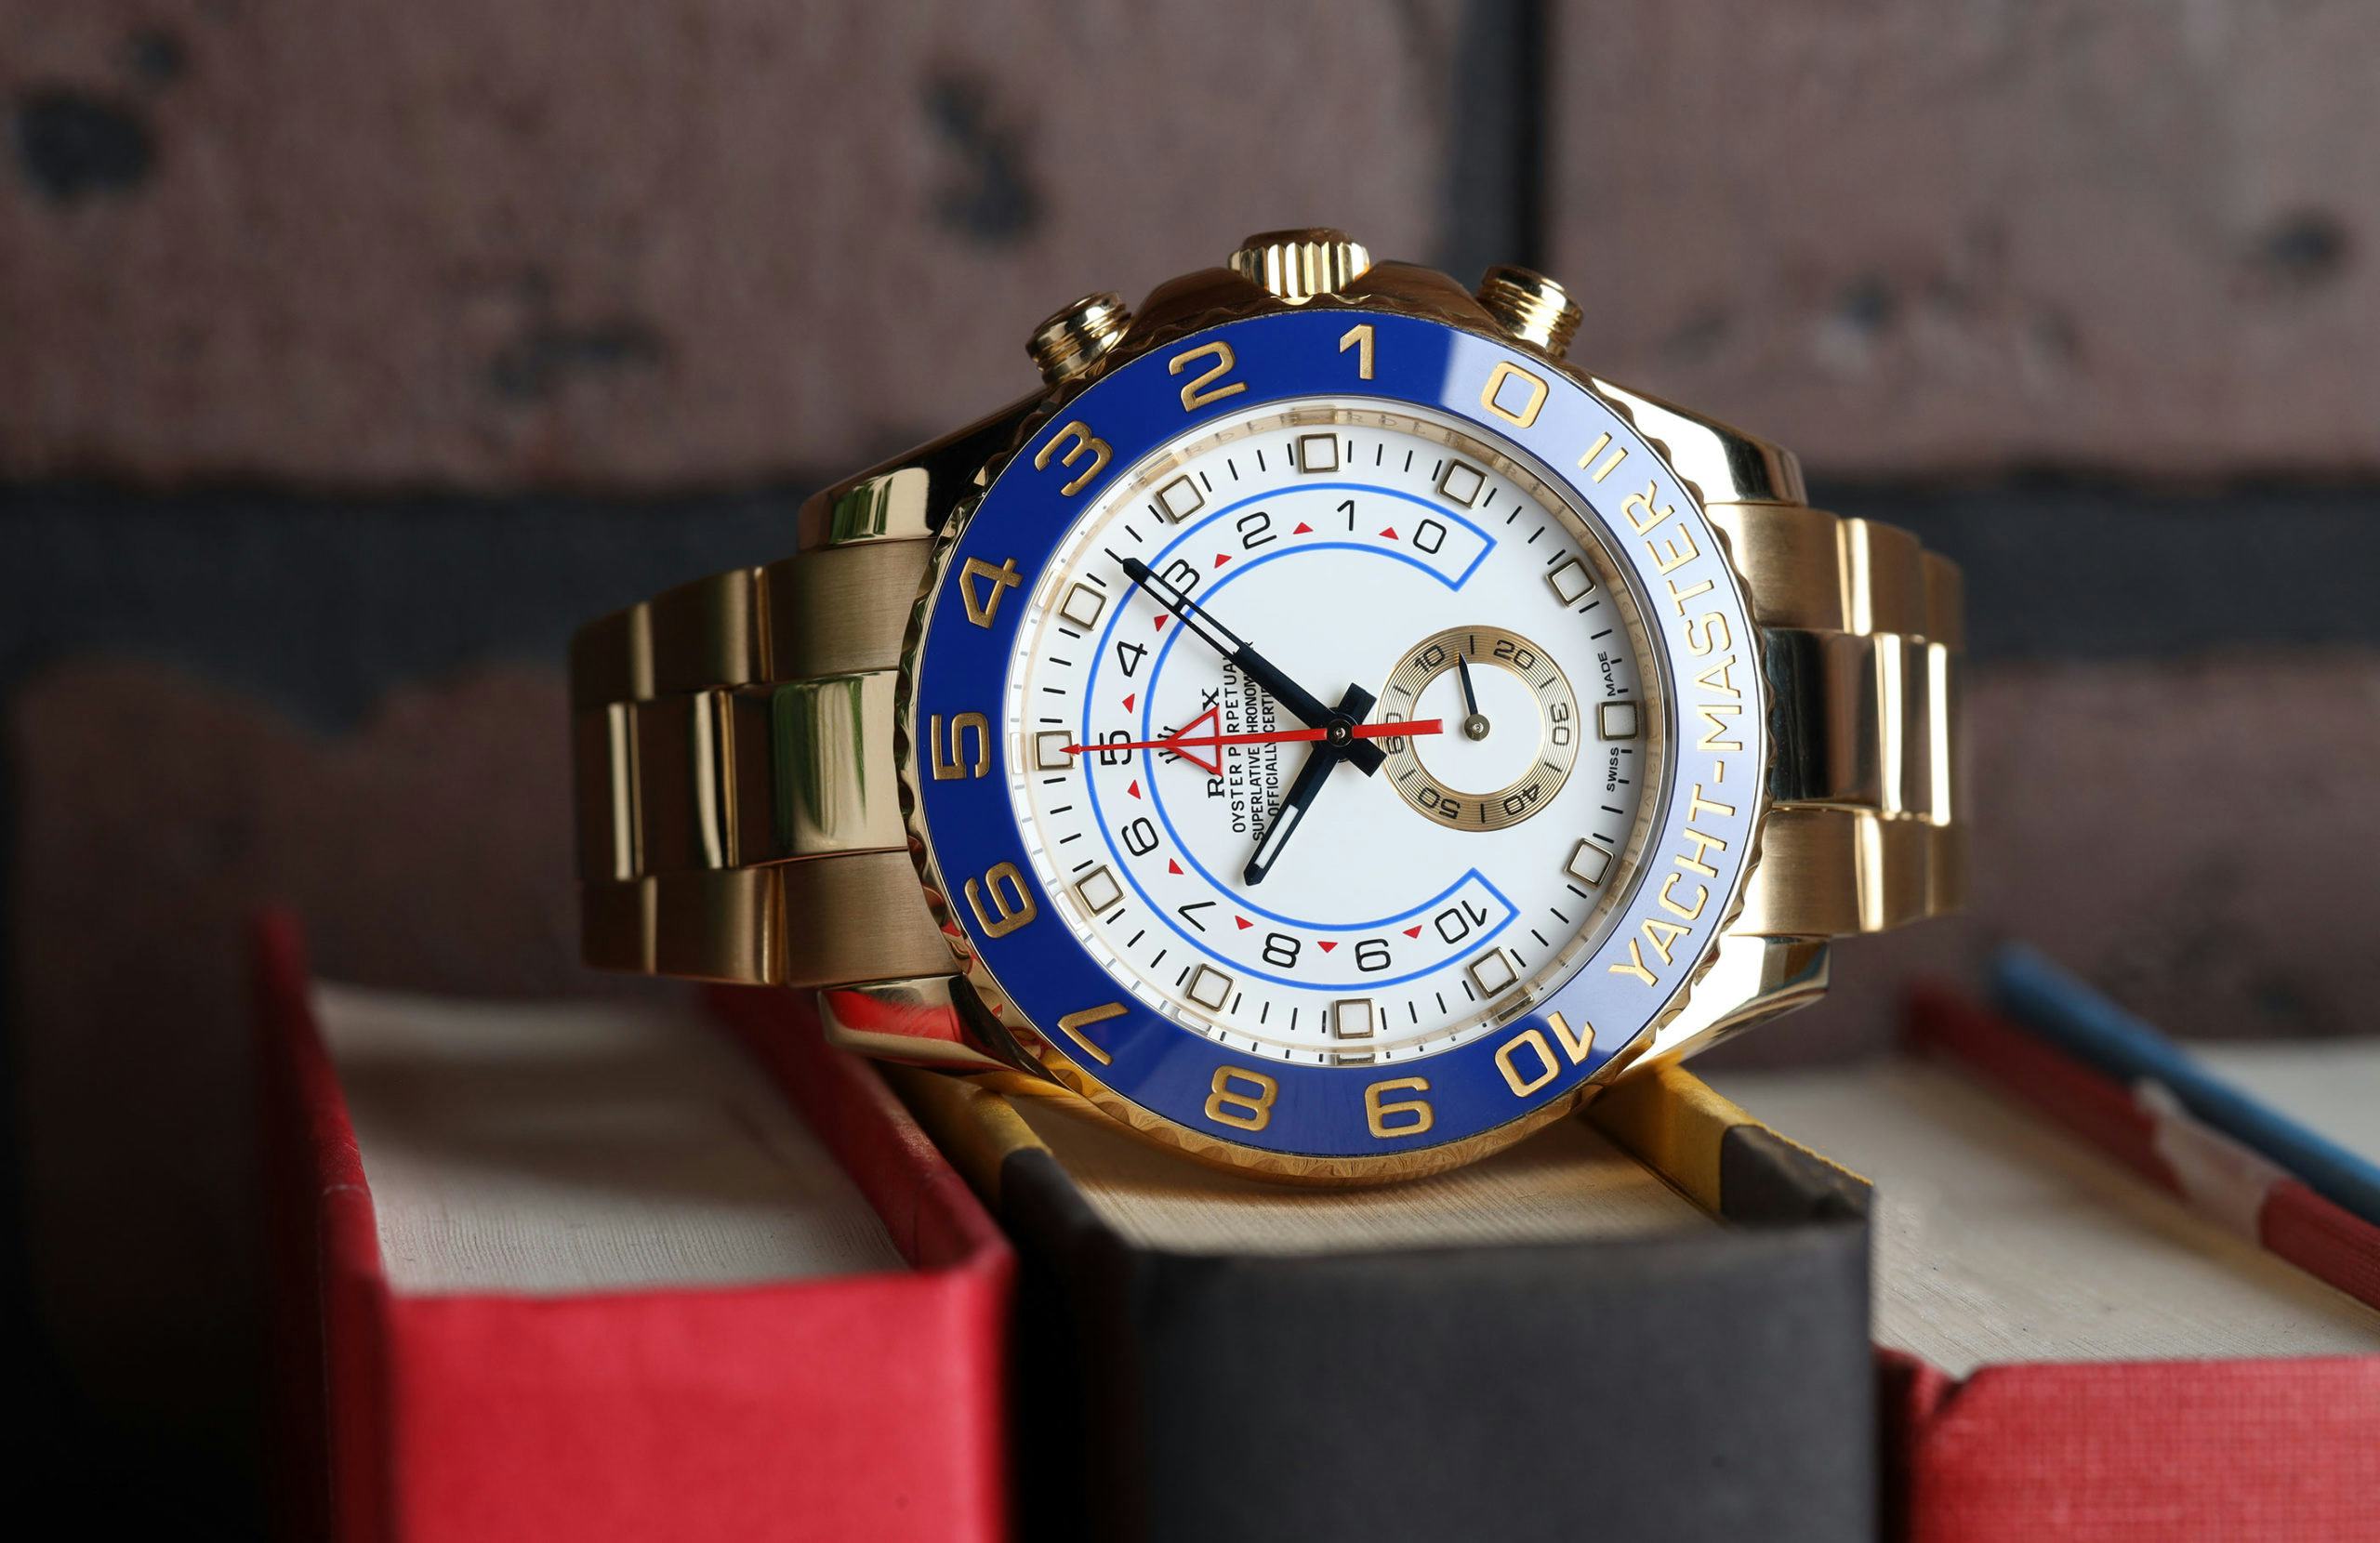 Rolex Yacht-Master II: Hands-On Expert Review